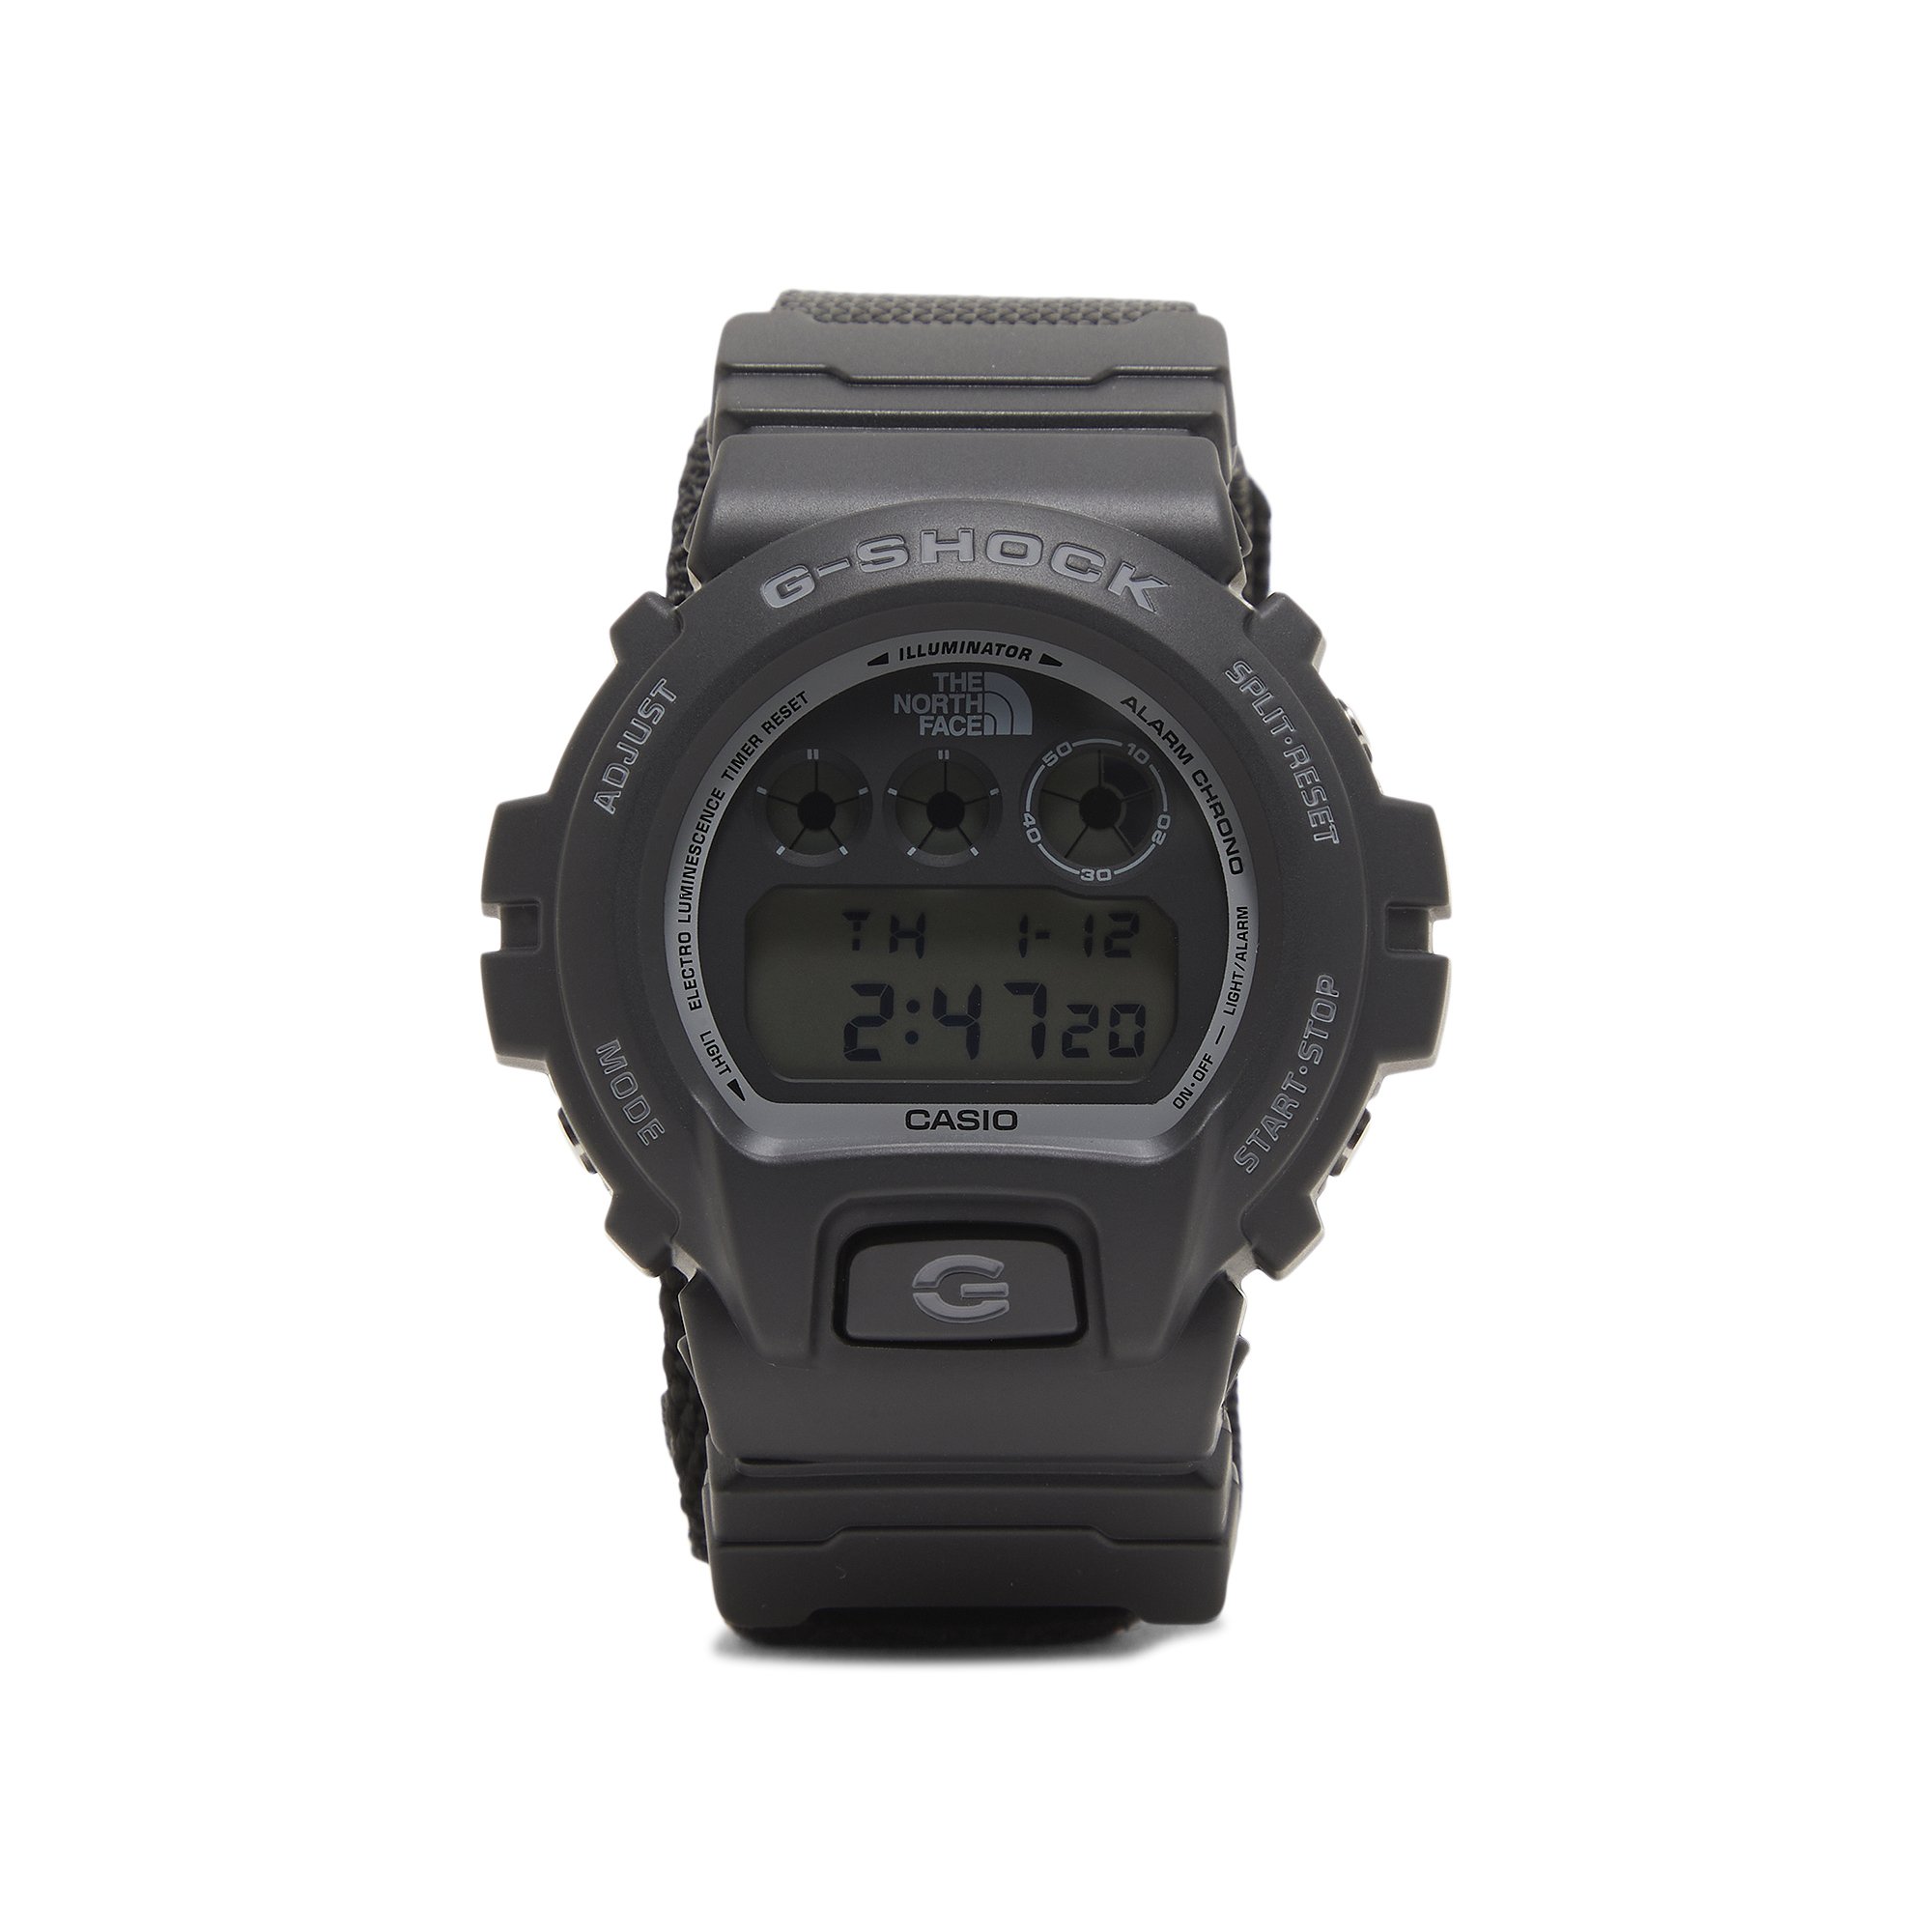 Supreme x The North Face x G-SHOCK Watch 'Black'